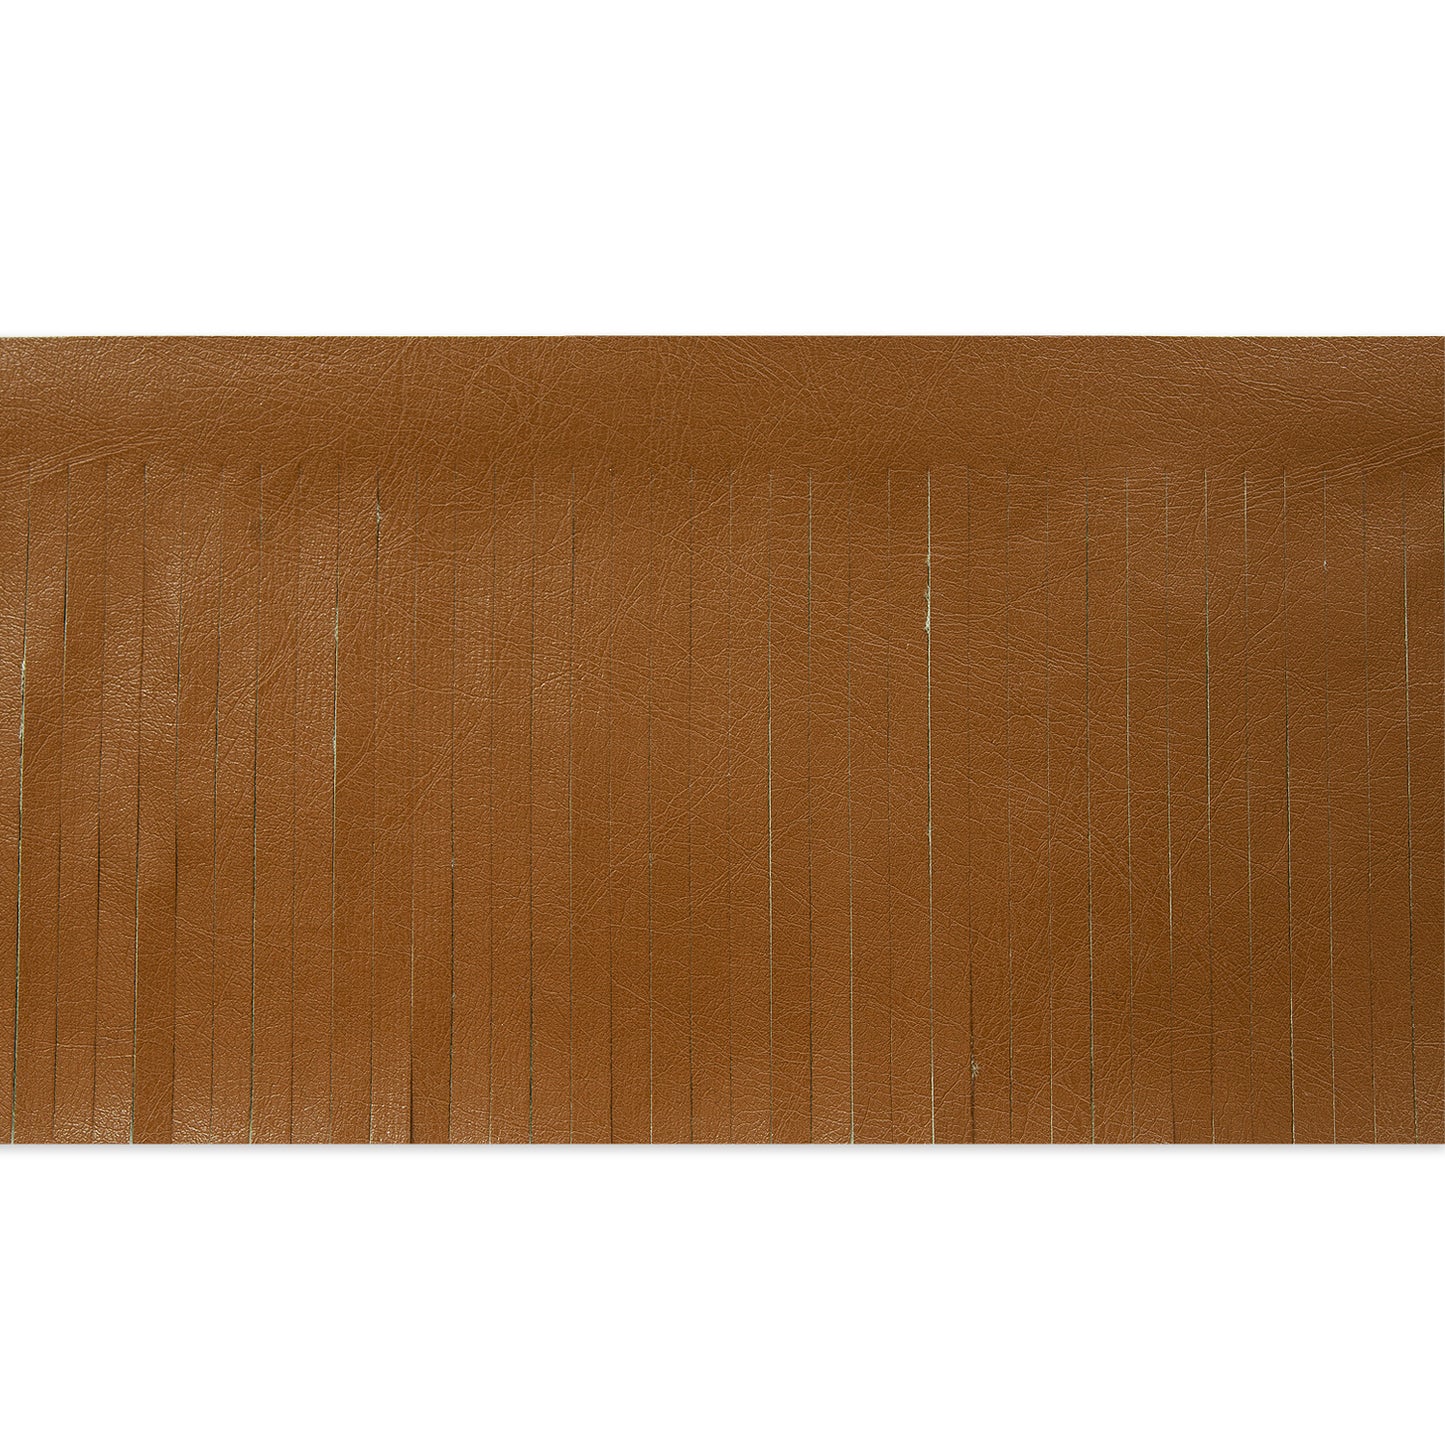 4" Glossy Finish Vegan Leather Fringe Trim (Sold by the Yard)